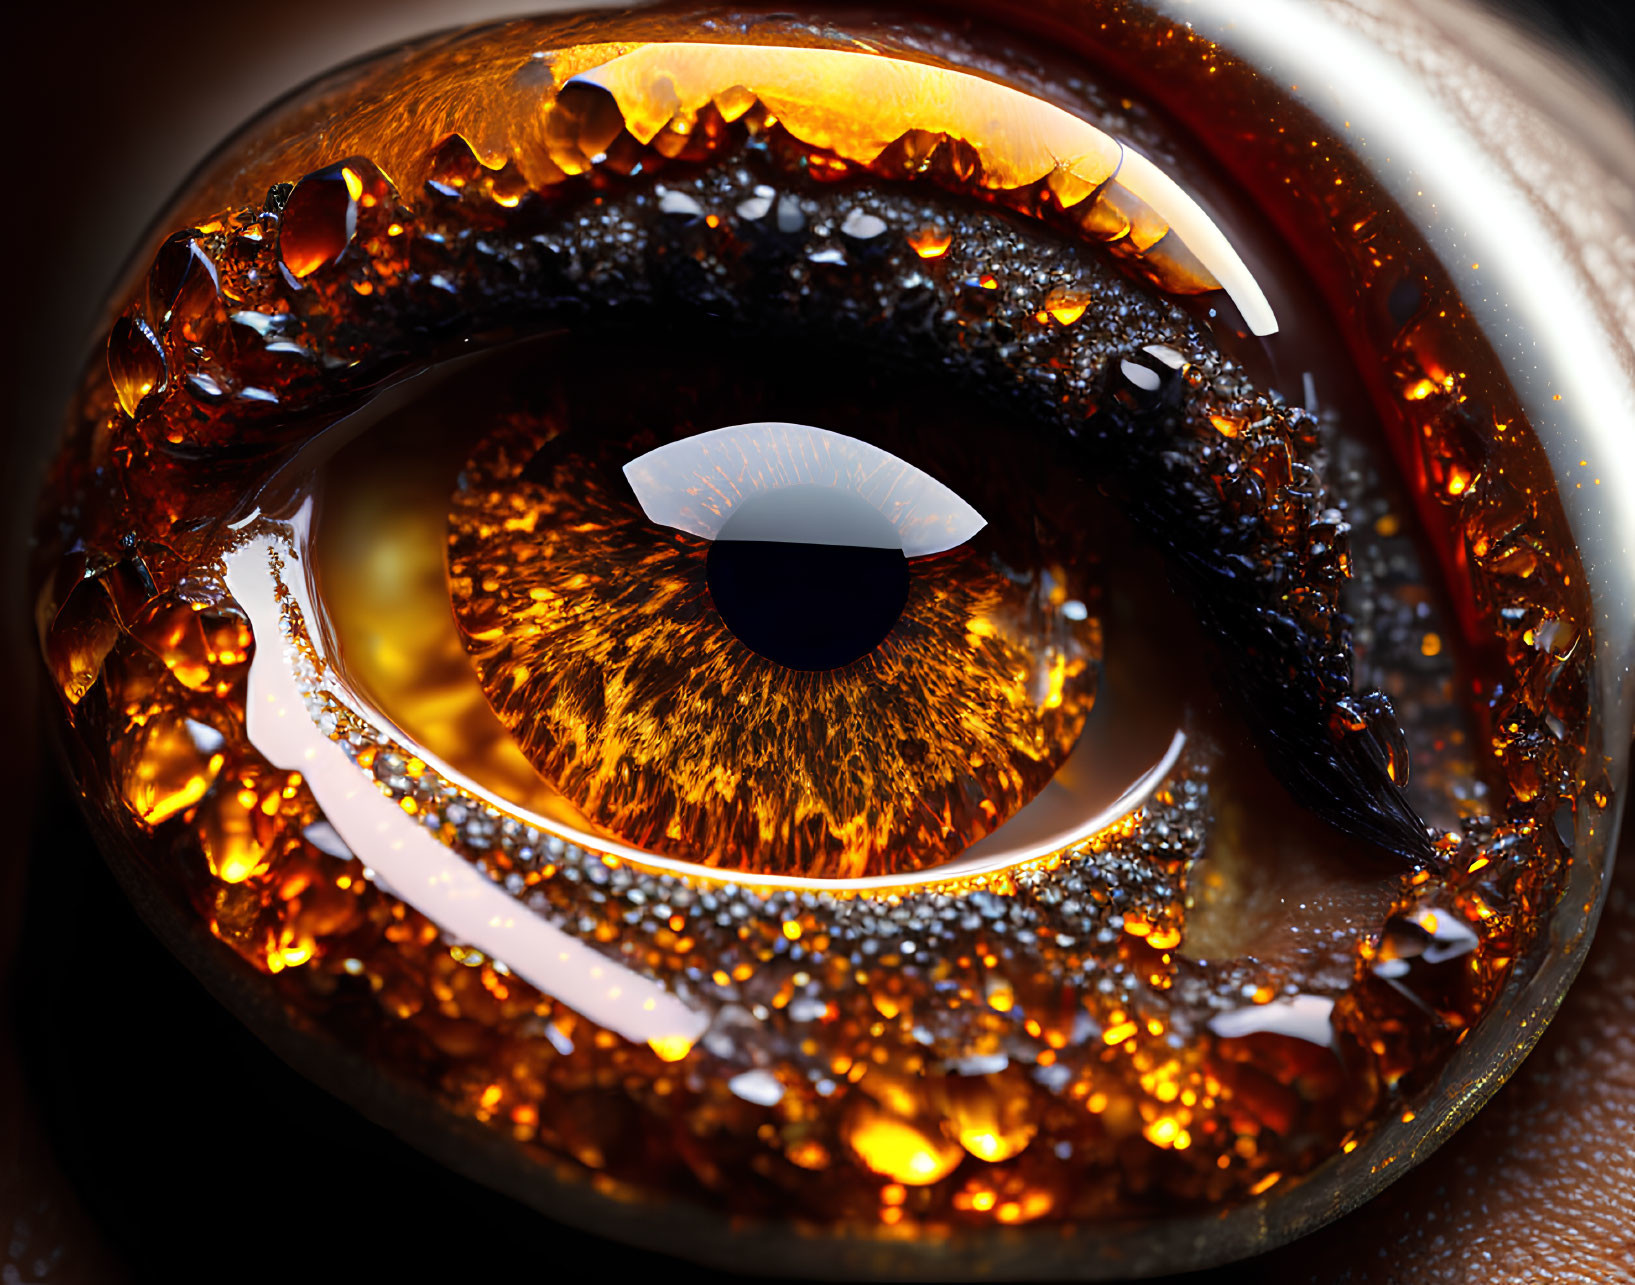 Detailed Amber Iris with Moisture Droplets Reflecting Light